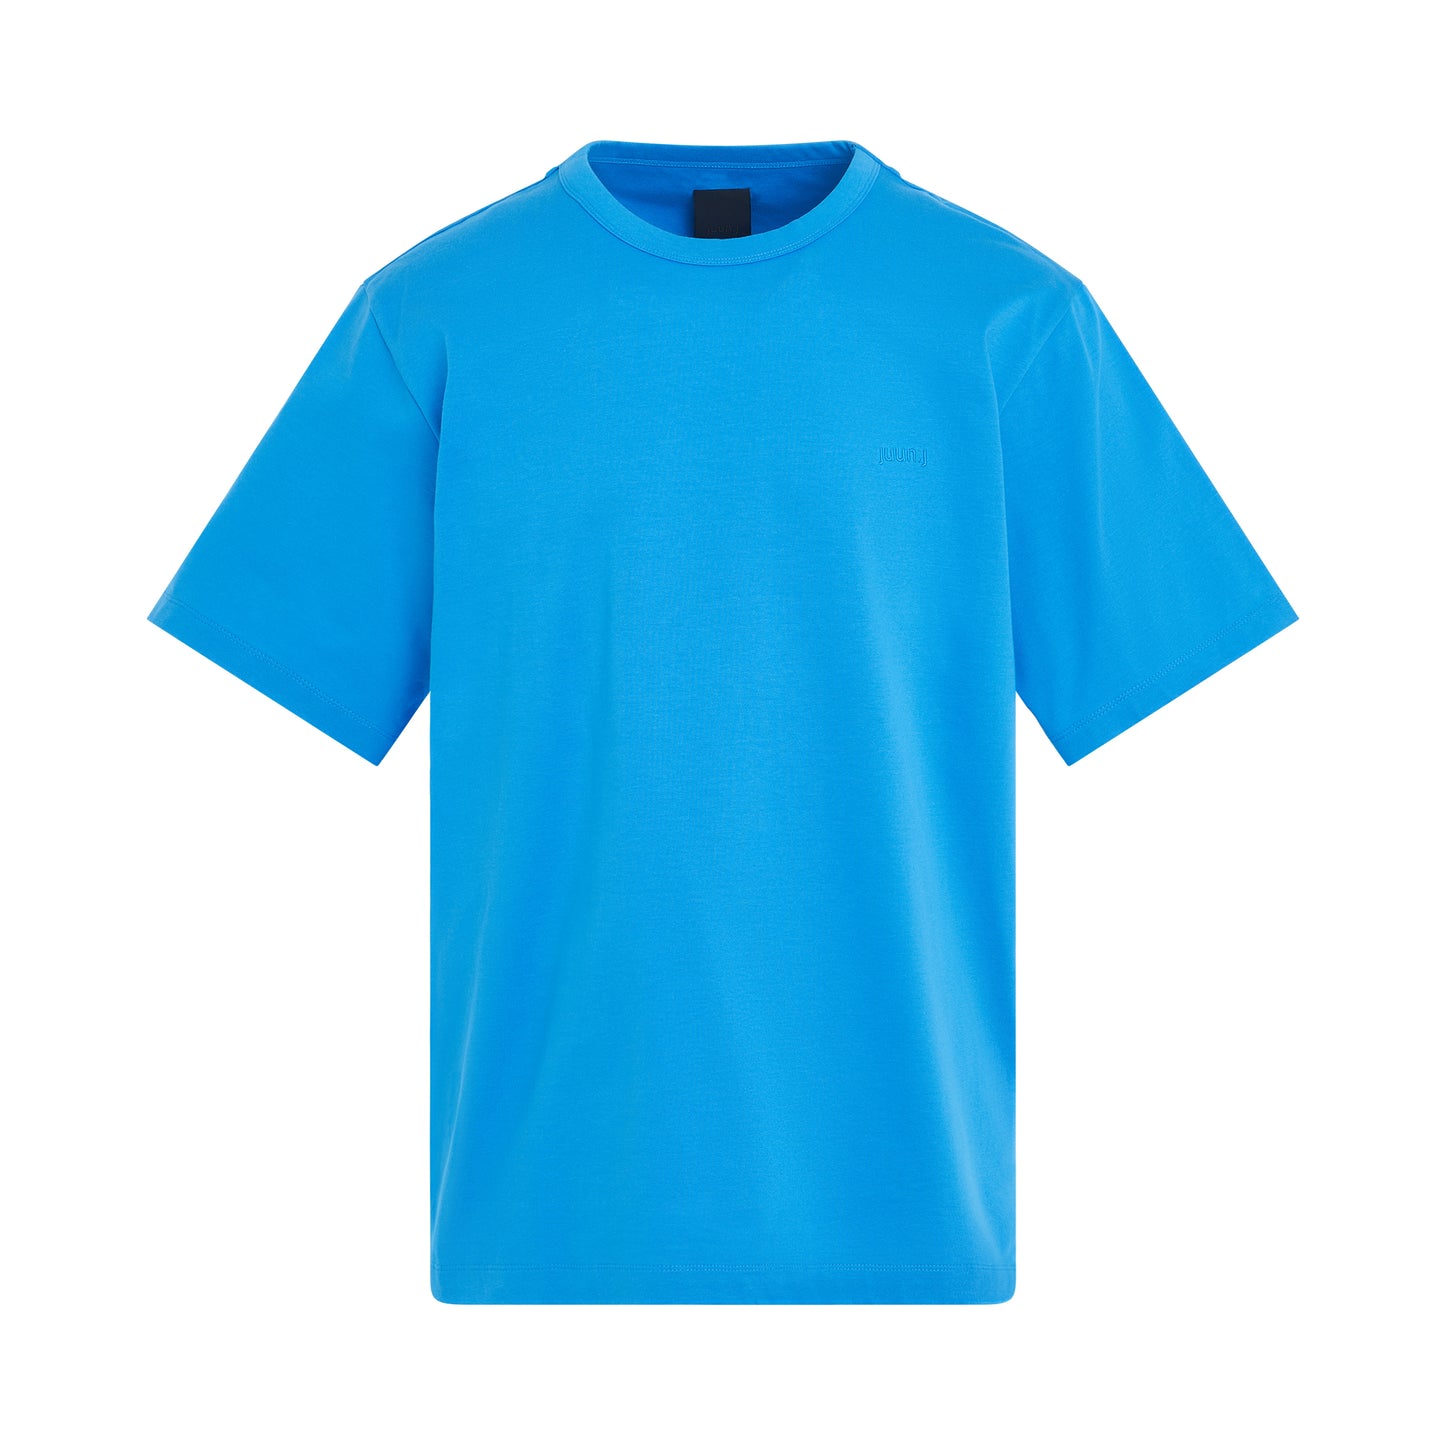 Loose Fit Short Sleeve T-Shirt in Blue